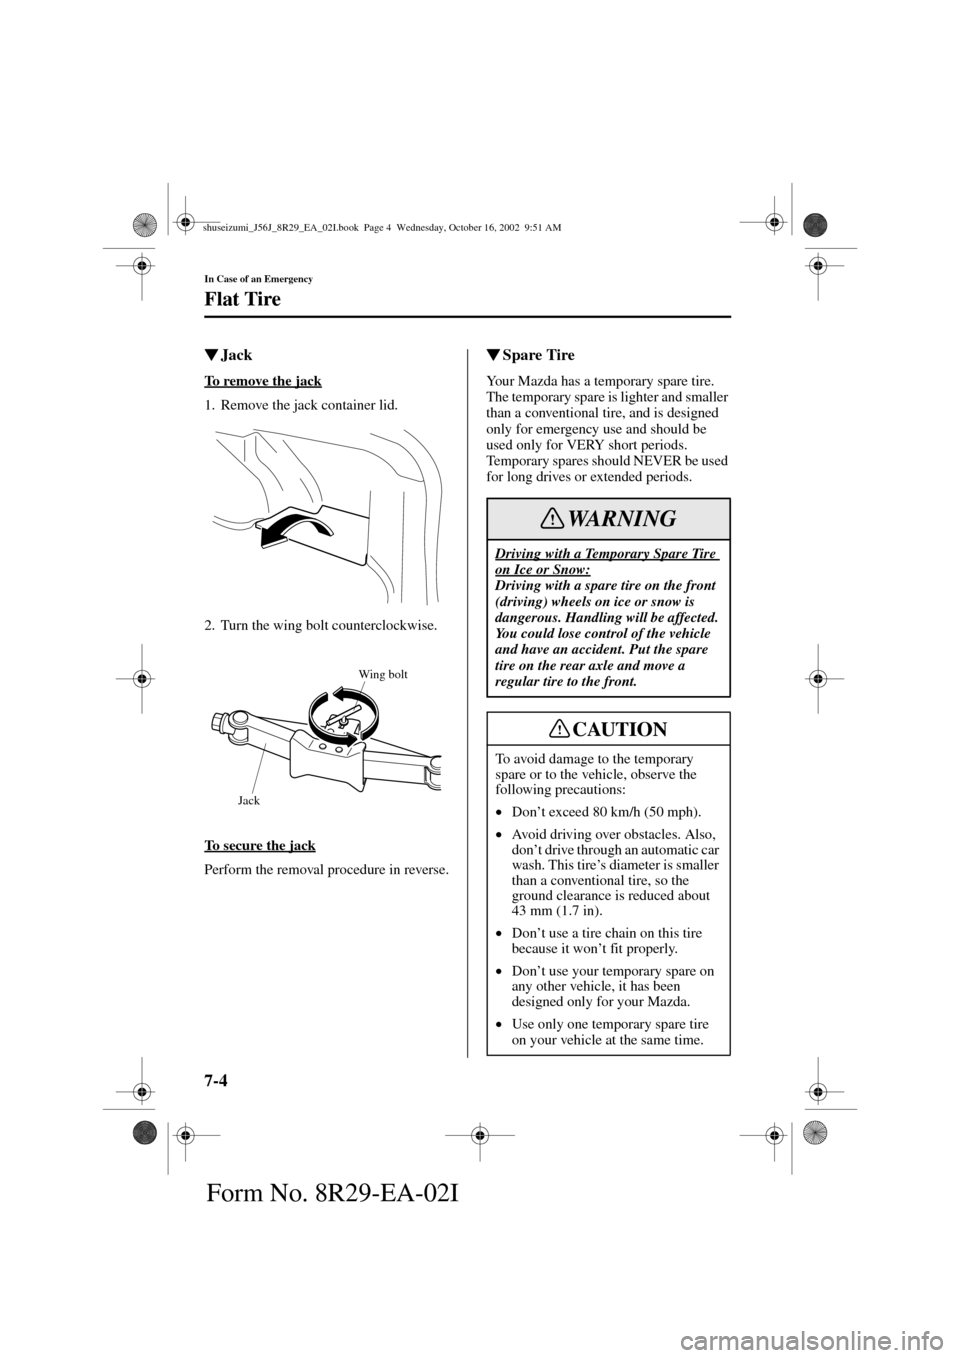 MAZDA MODEL 6 2003  Owners Manual (in English) 7-4
In Case of an Emergency
Flat Tire
Form No. 8R29-EA-02I
Jack
To remove the jack
1. Remove the jack container lid.
2. Turn the wing bolt counterclockwise.
To secure the jack
Perform the removal pro